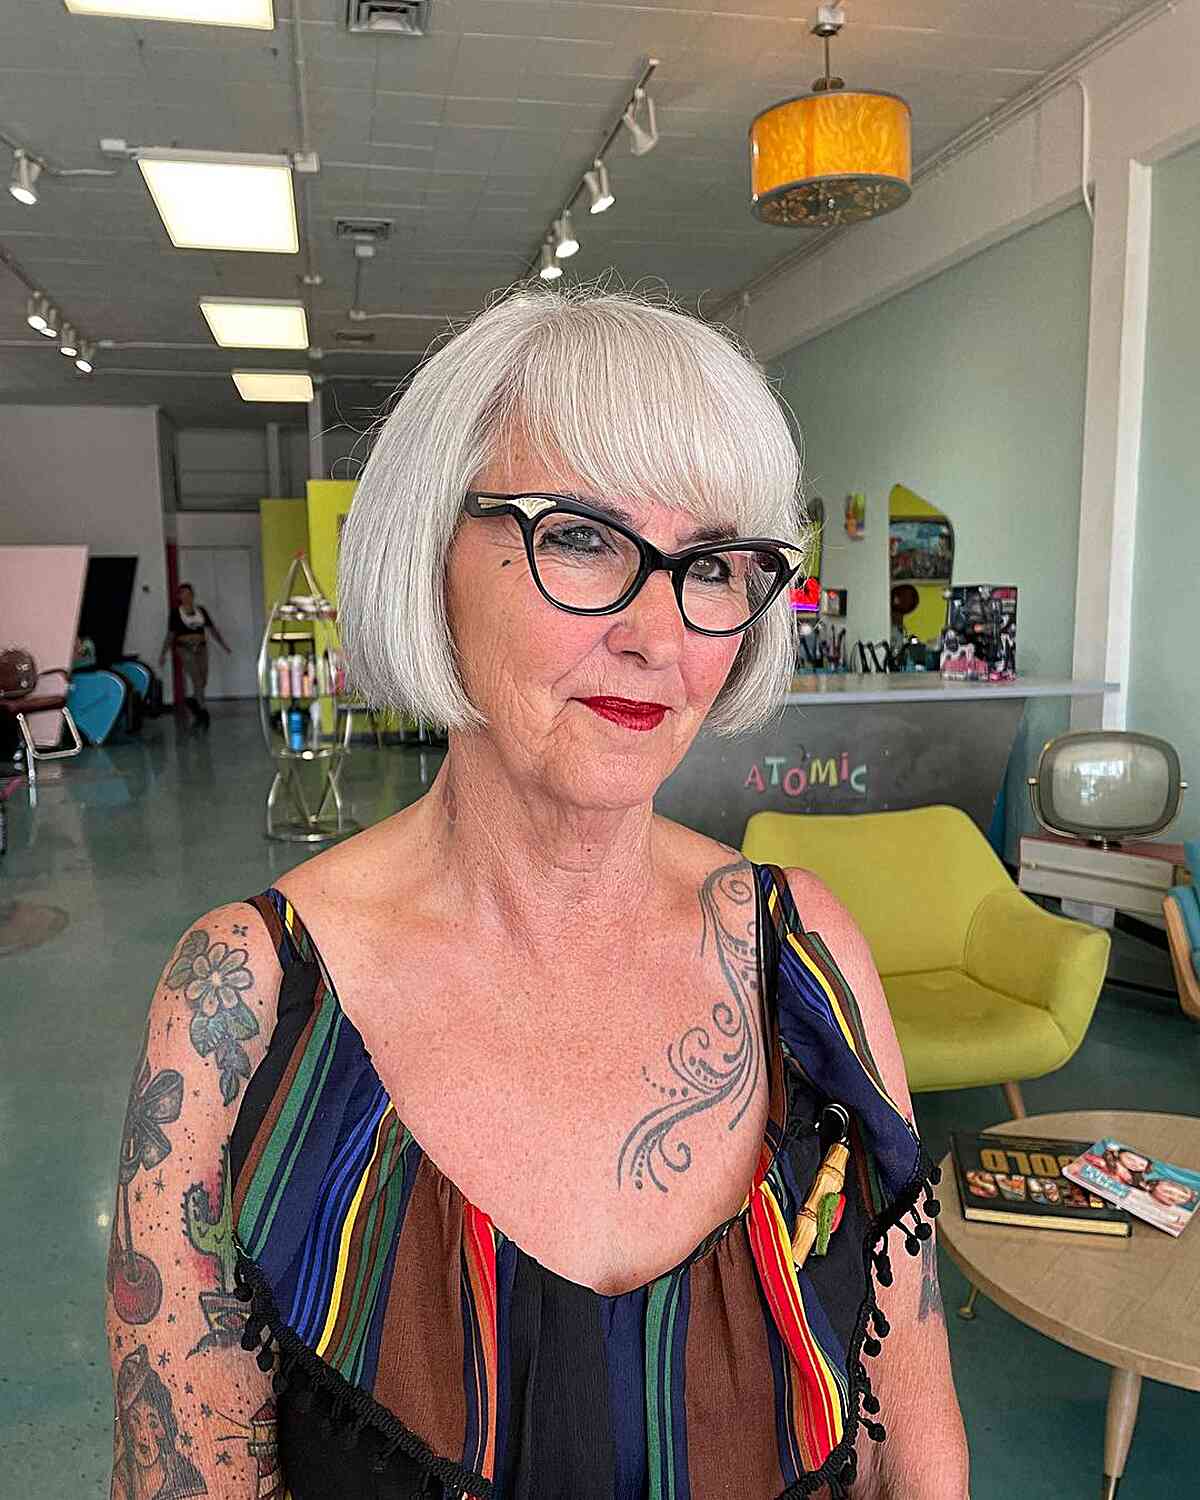 Spicy Bob with Natural Color for Women Aged 60 with Specs